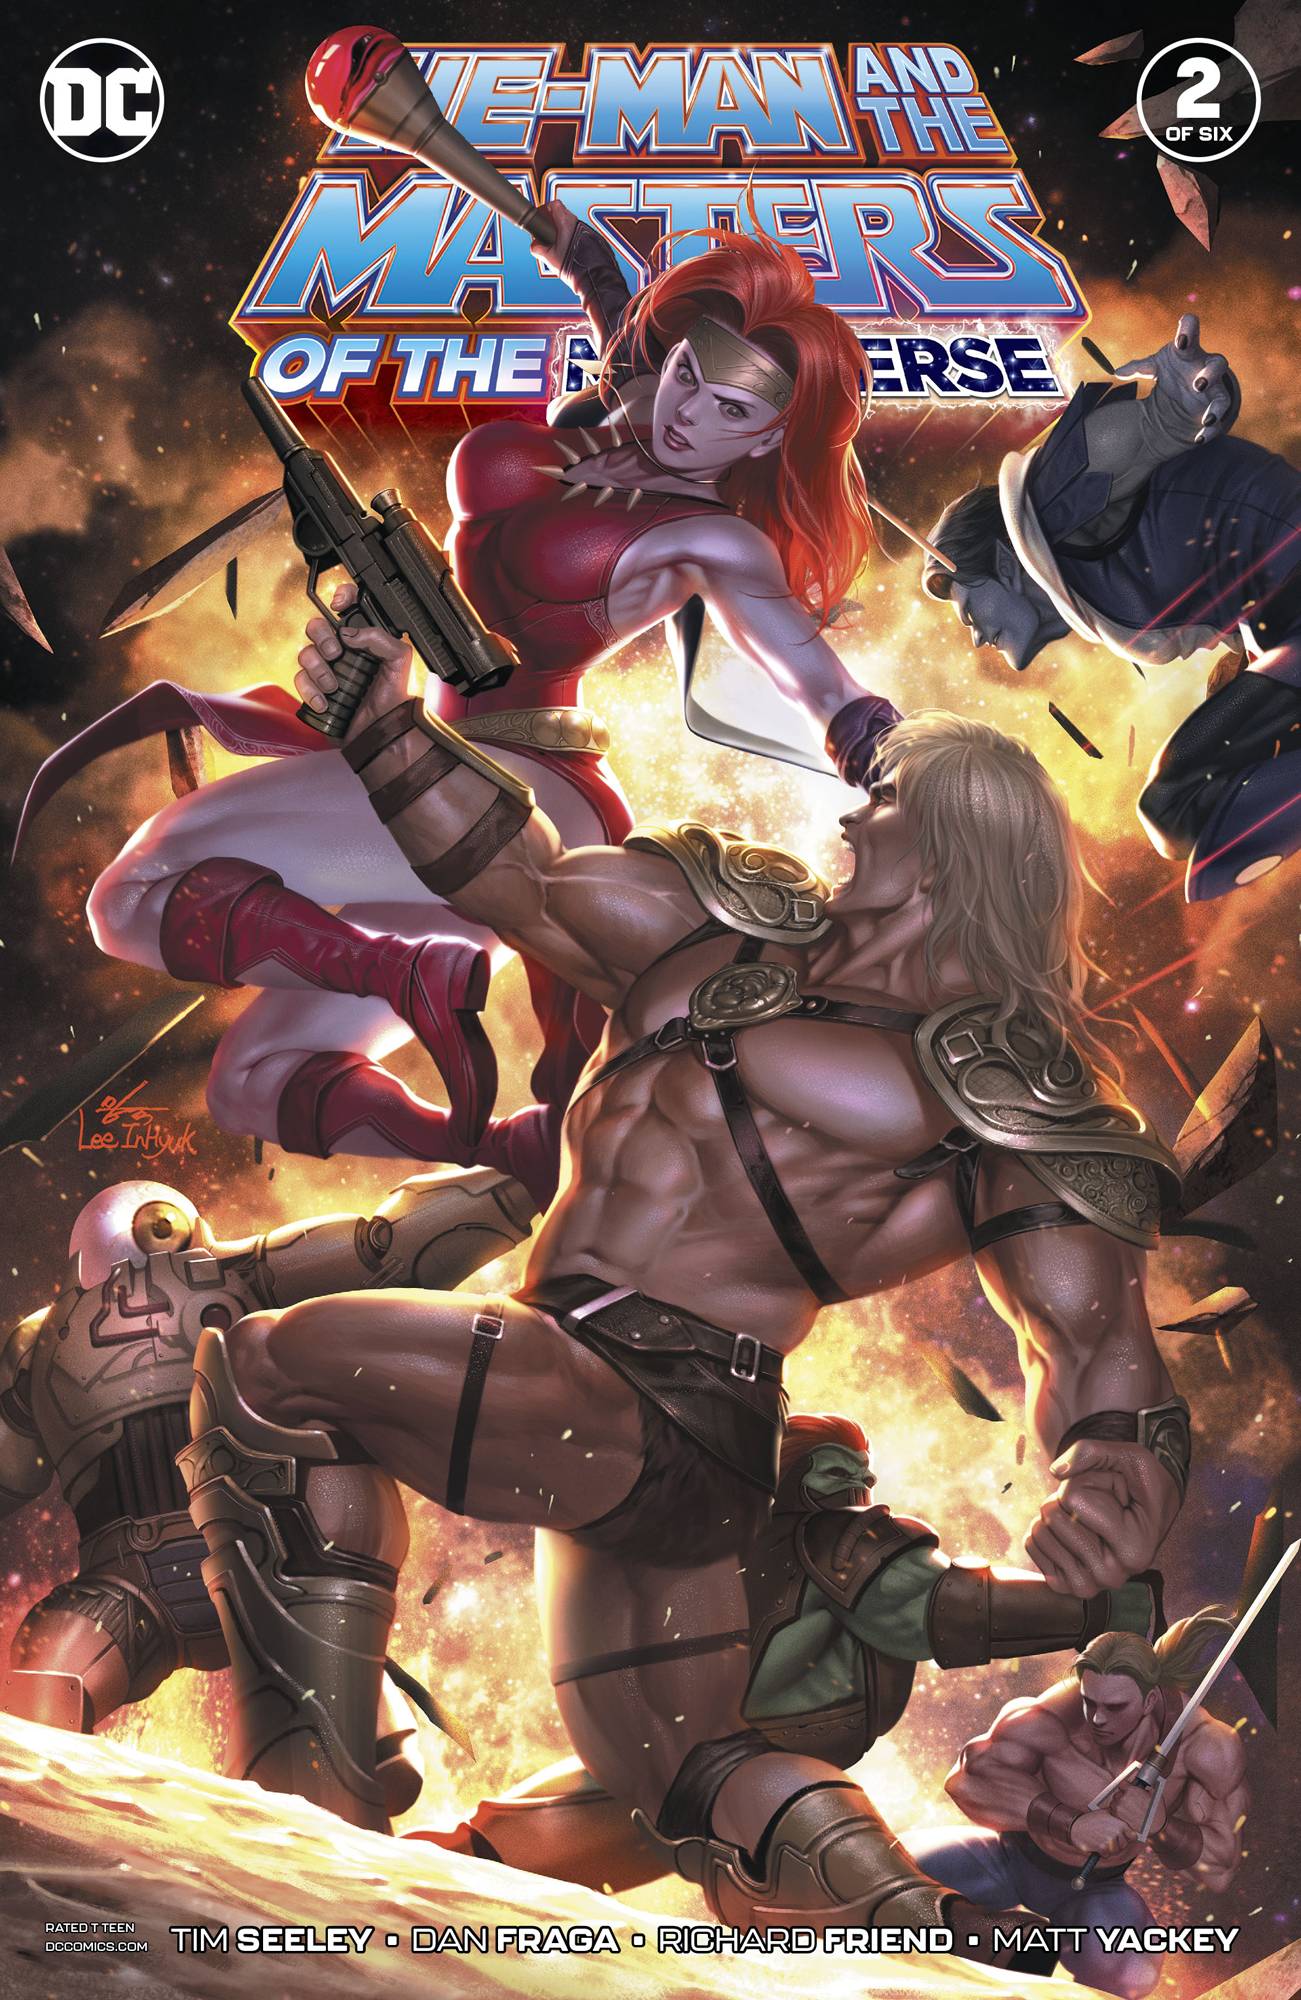 He-Man & The Masters of the Multiverse #2 (Of 6)